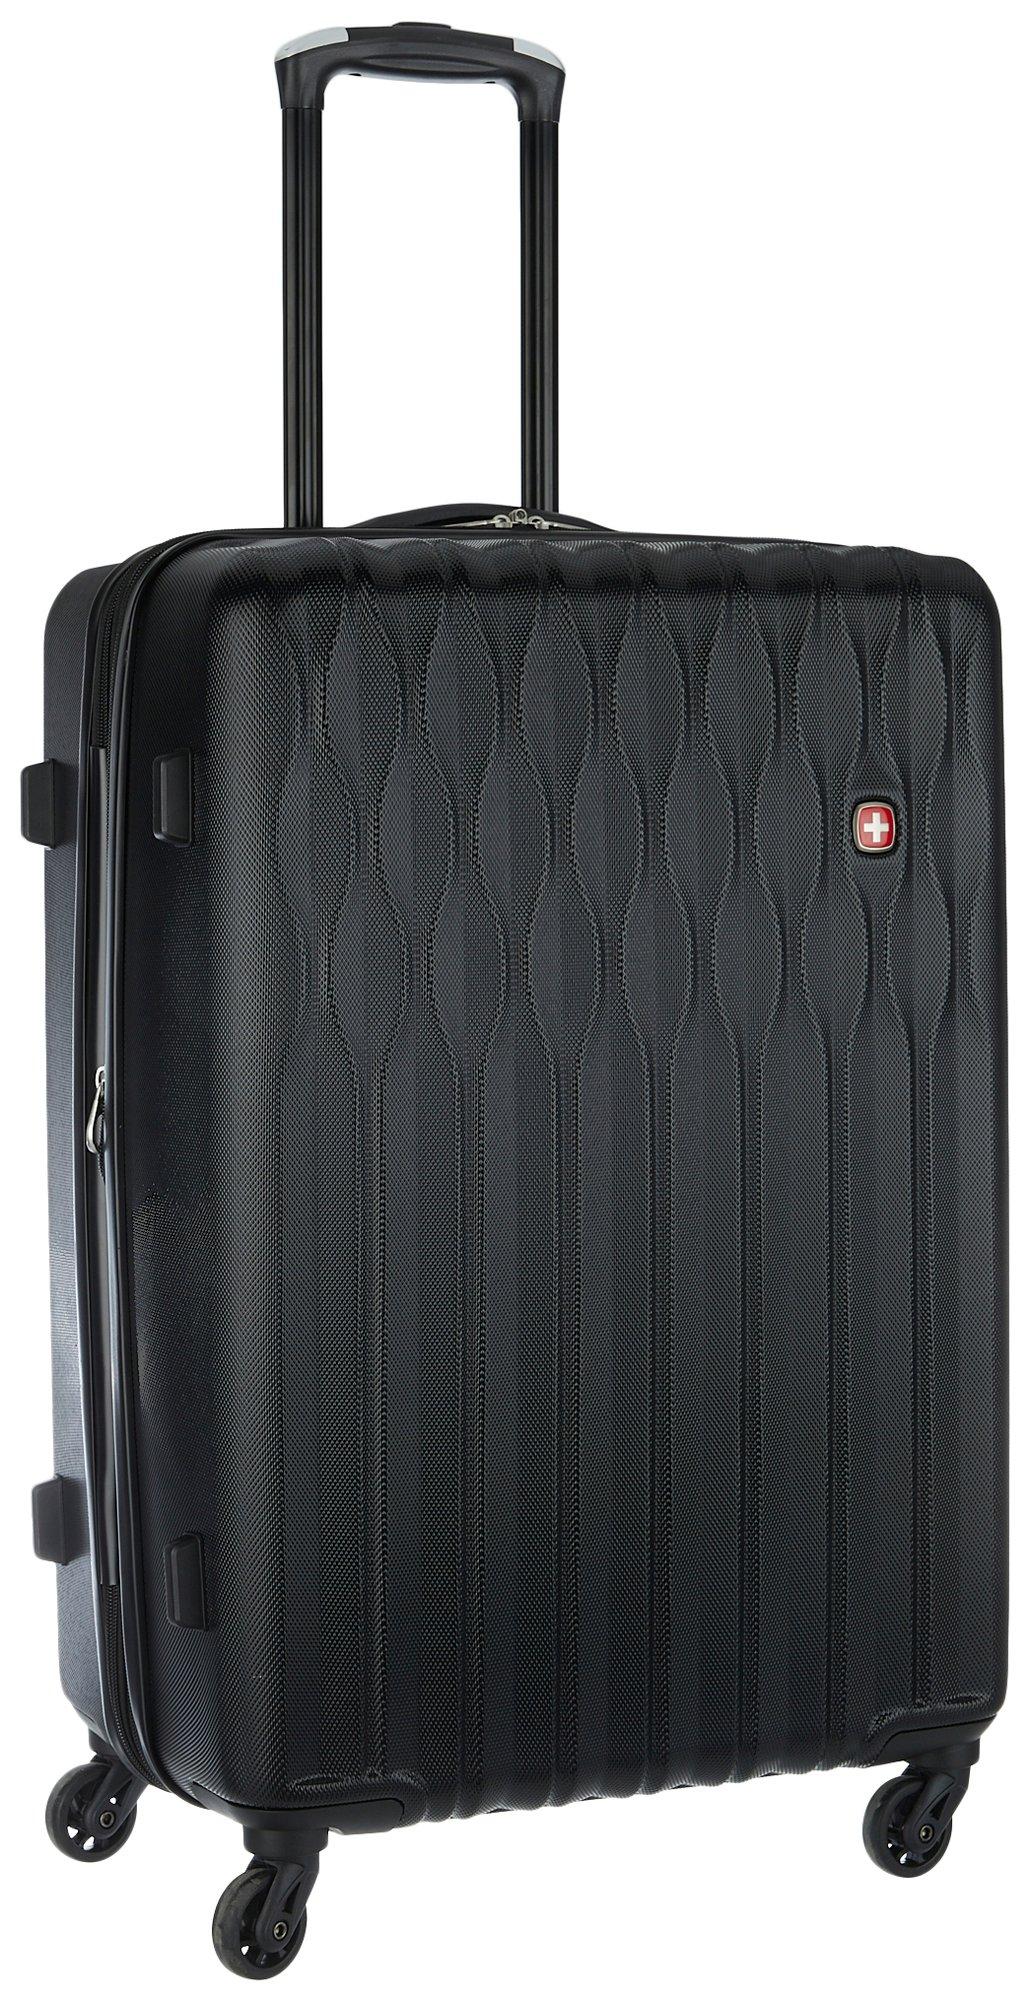 Swiss Gear 24'' 8018 Expandable Hardside Spinner Luggage